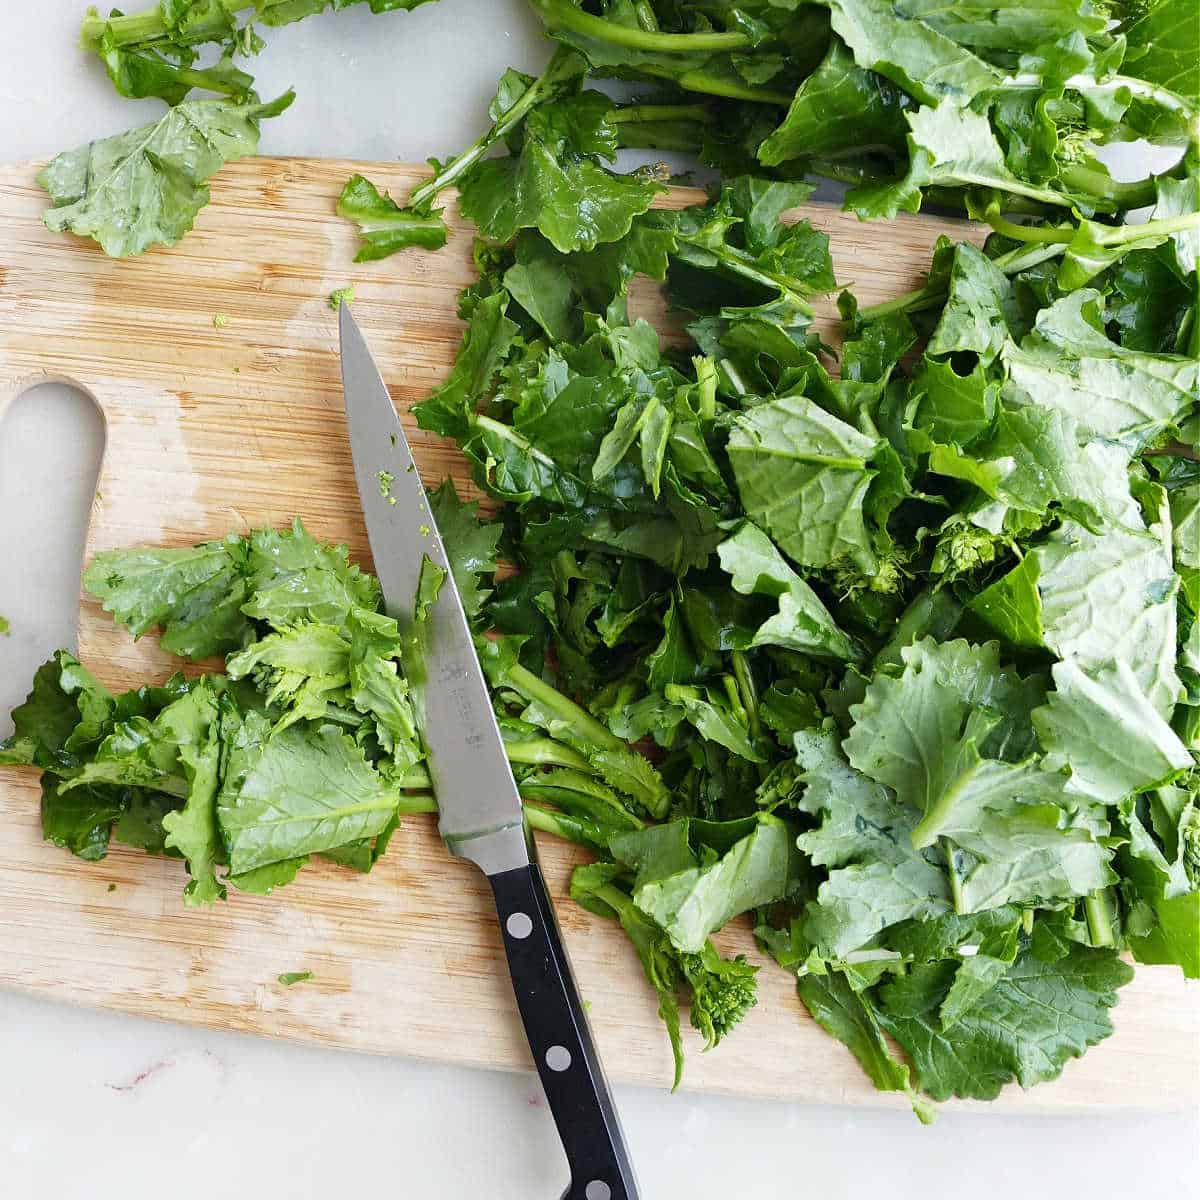 rapini being cut into smaller pieces on a cutting board with a knife